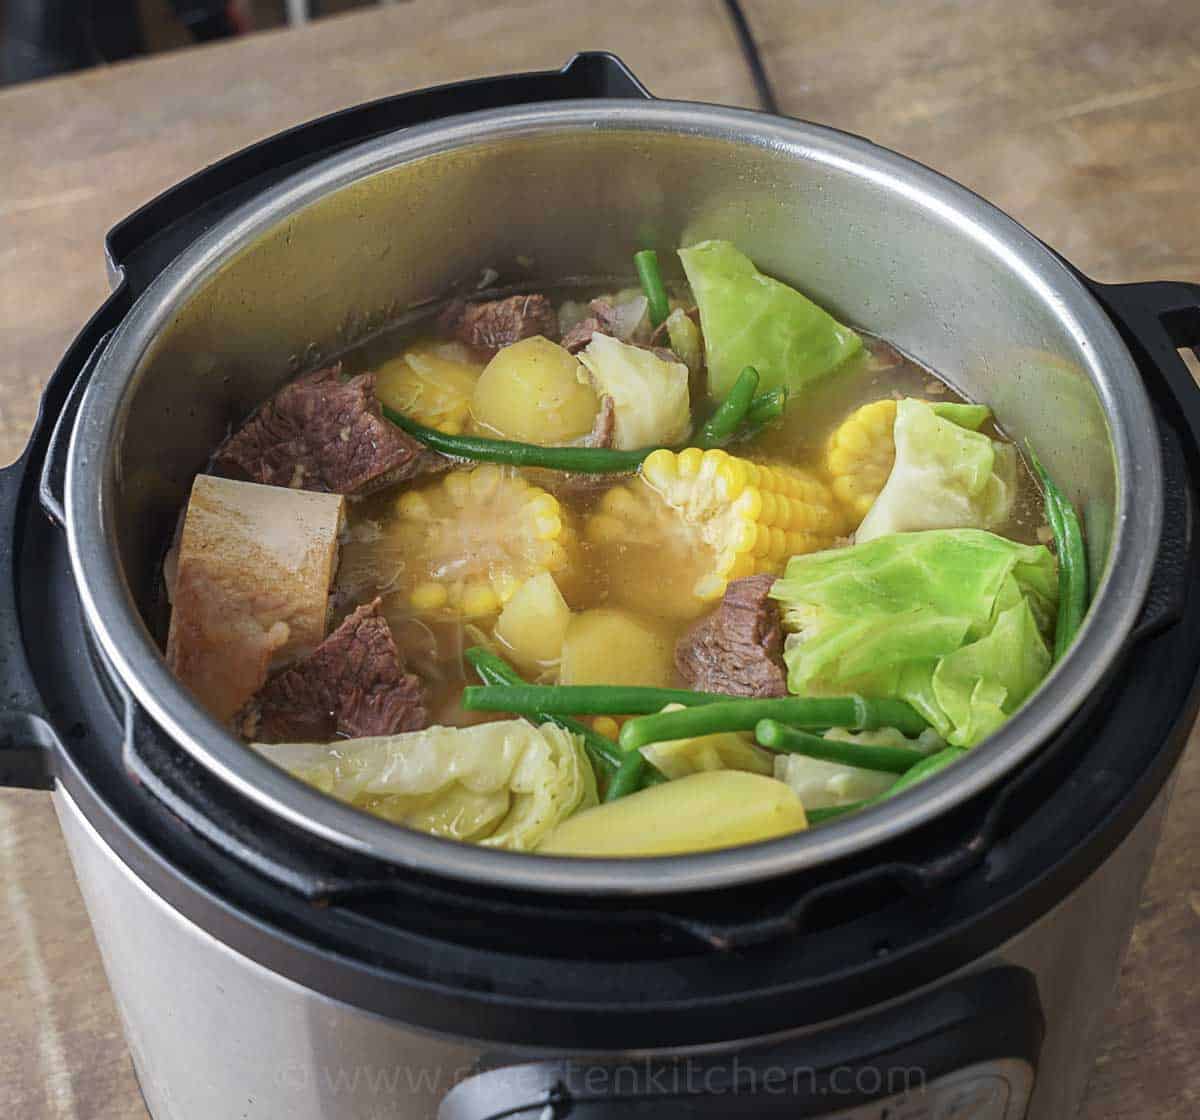 Beef Nilaga or Nilagang baka cooked in an Instant pot pressure cooker.